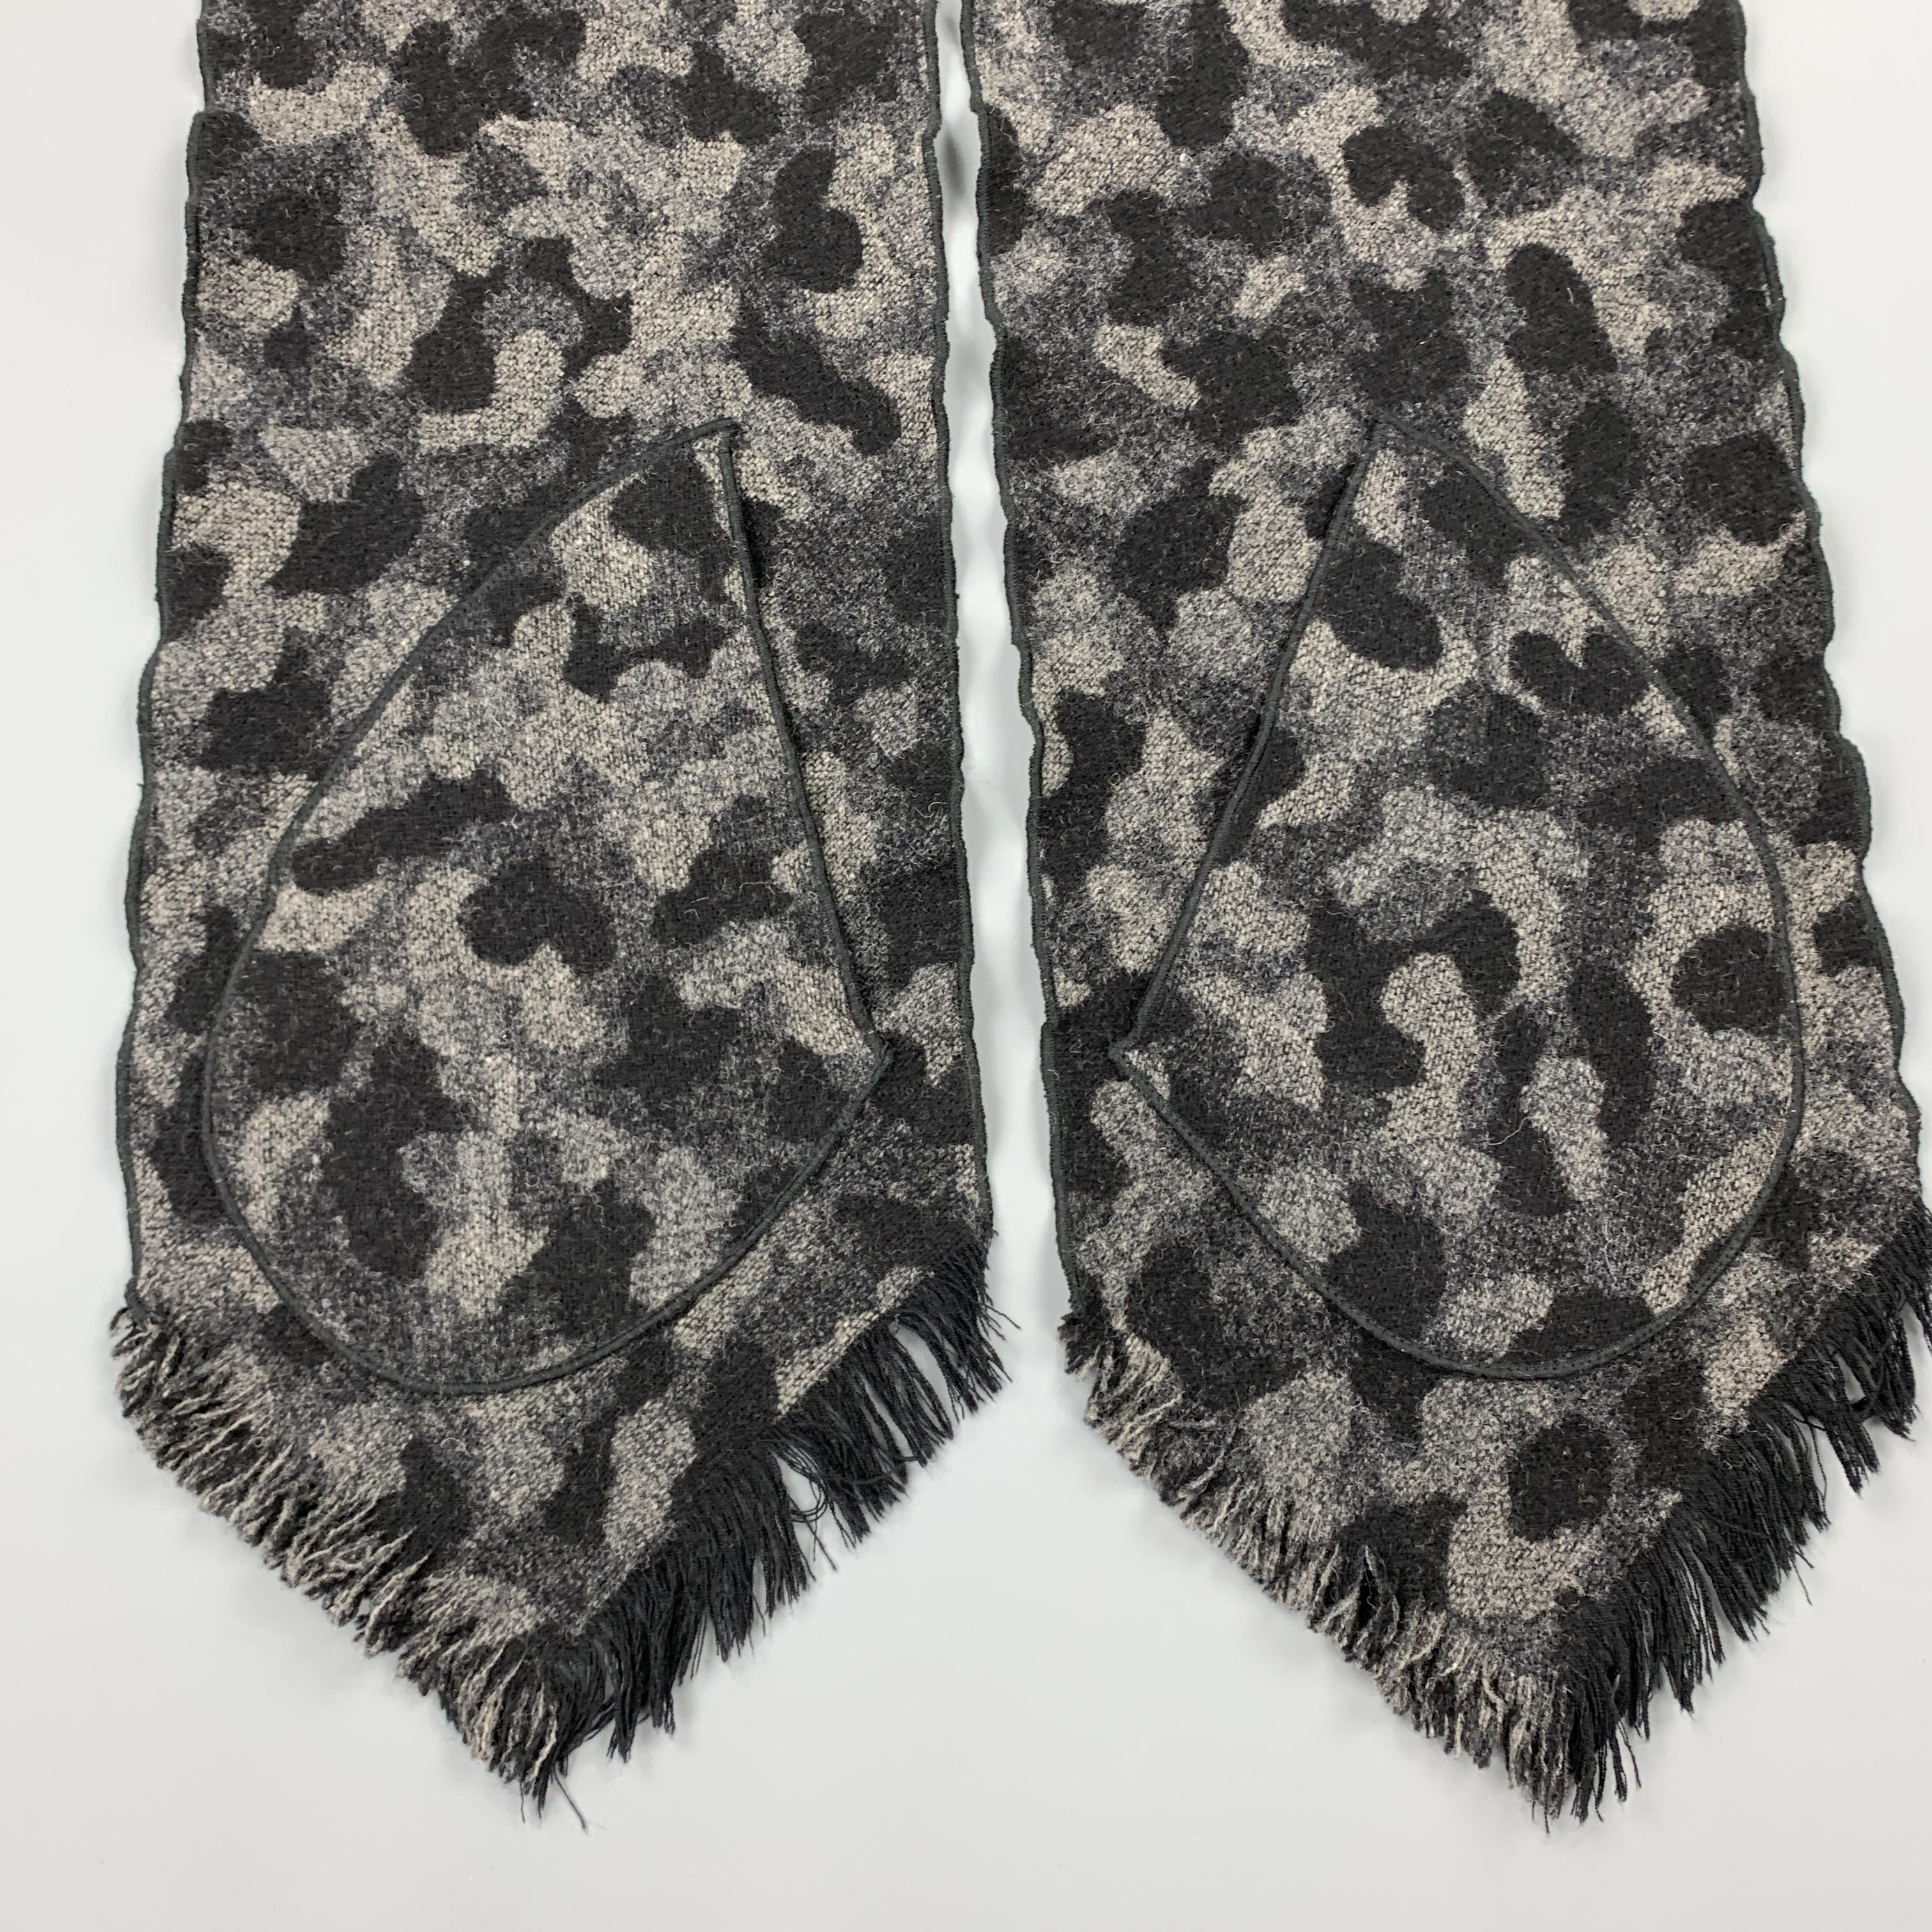 MONITALY scarf comes in grayscale camouflage wool with patch pockets and fringe edges. 

Excellent Pre-Owned Condition.

Length: 66 in.
Width: 9.5 in.